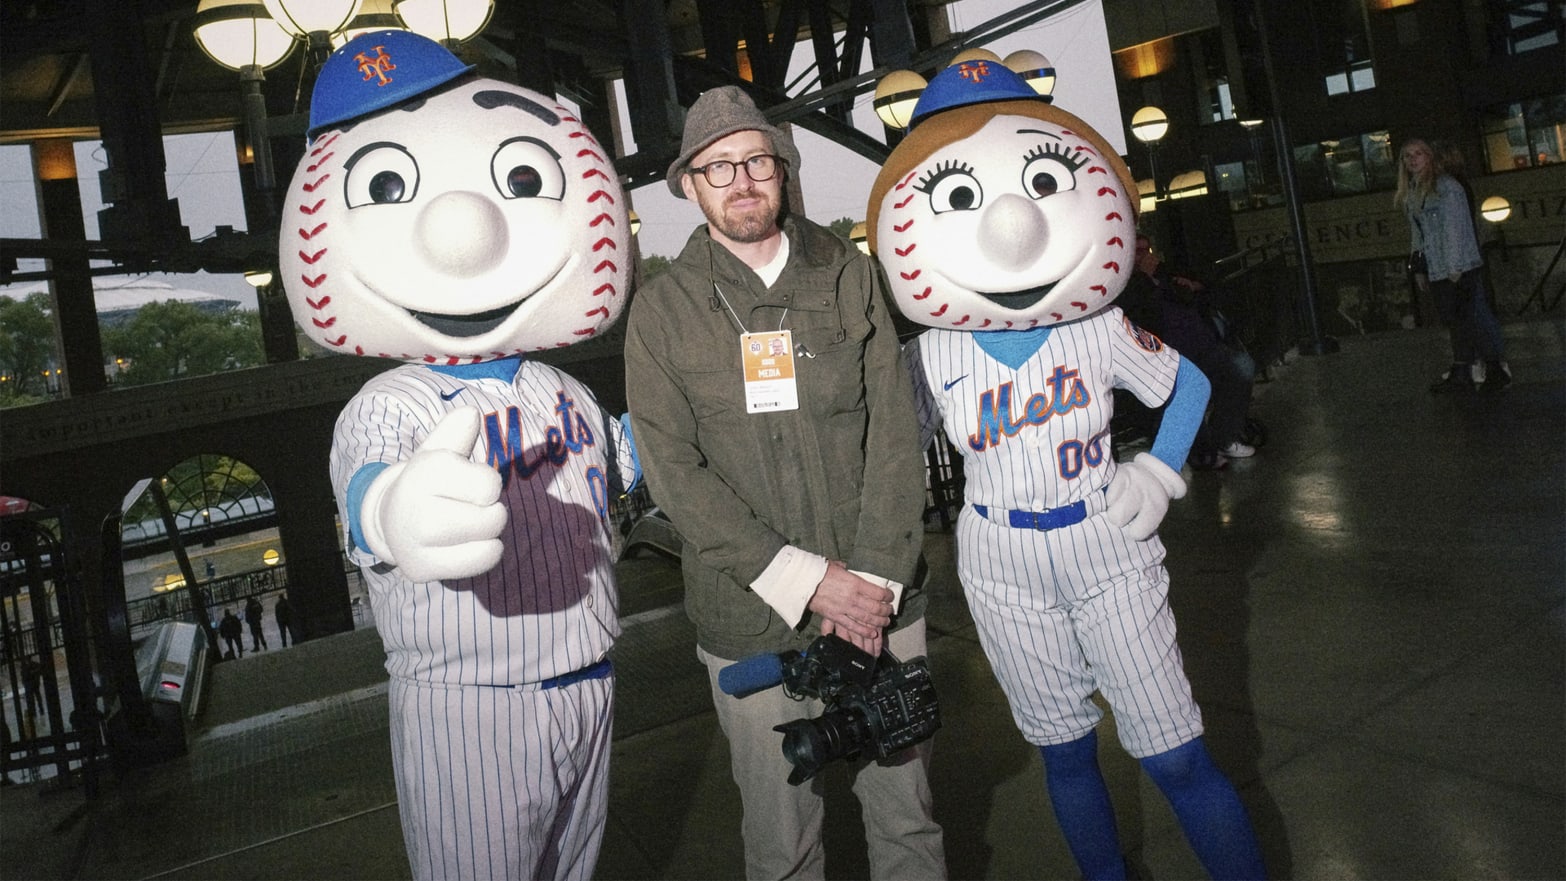 John Wilson poses with Mr and Mrs Met at Mets Stadium.